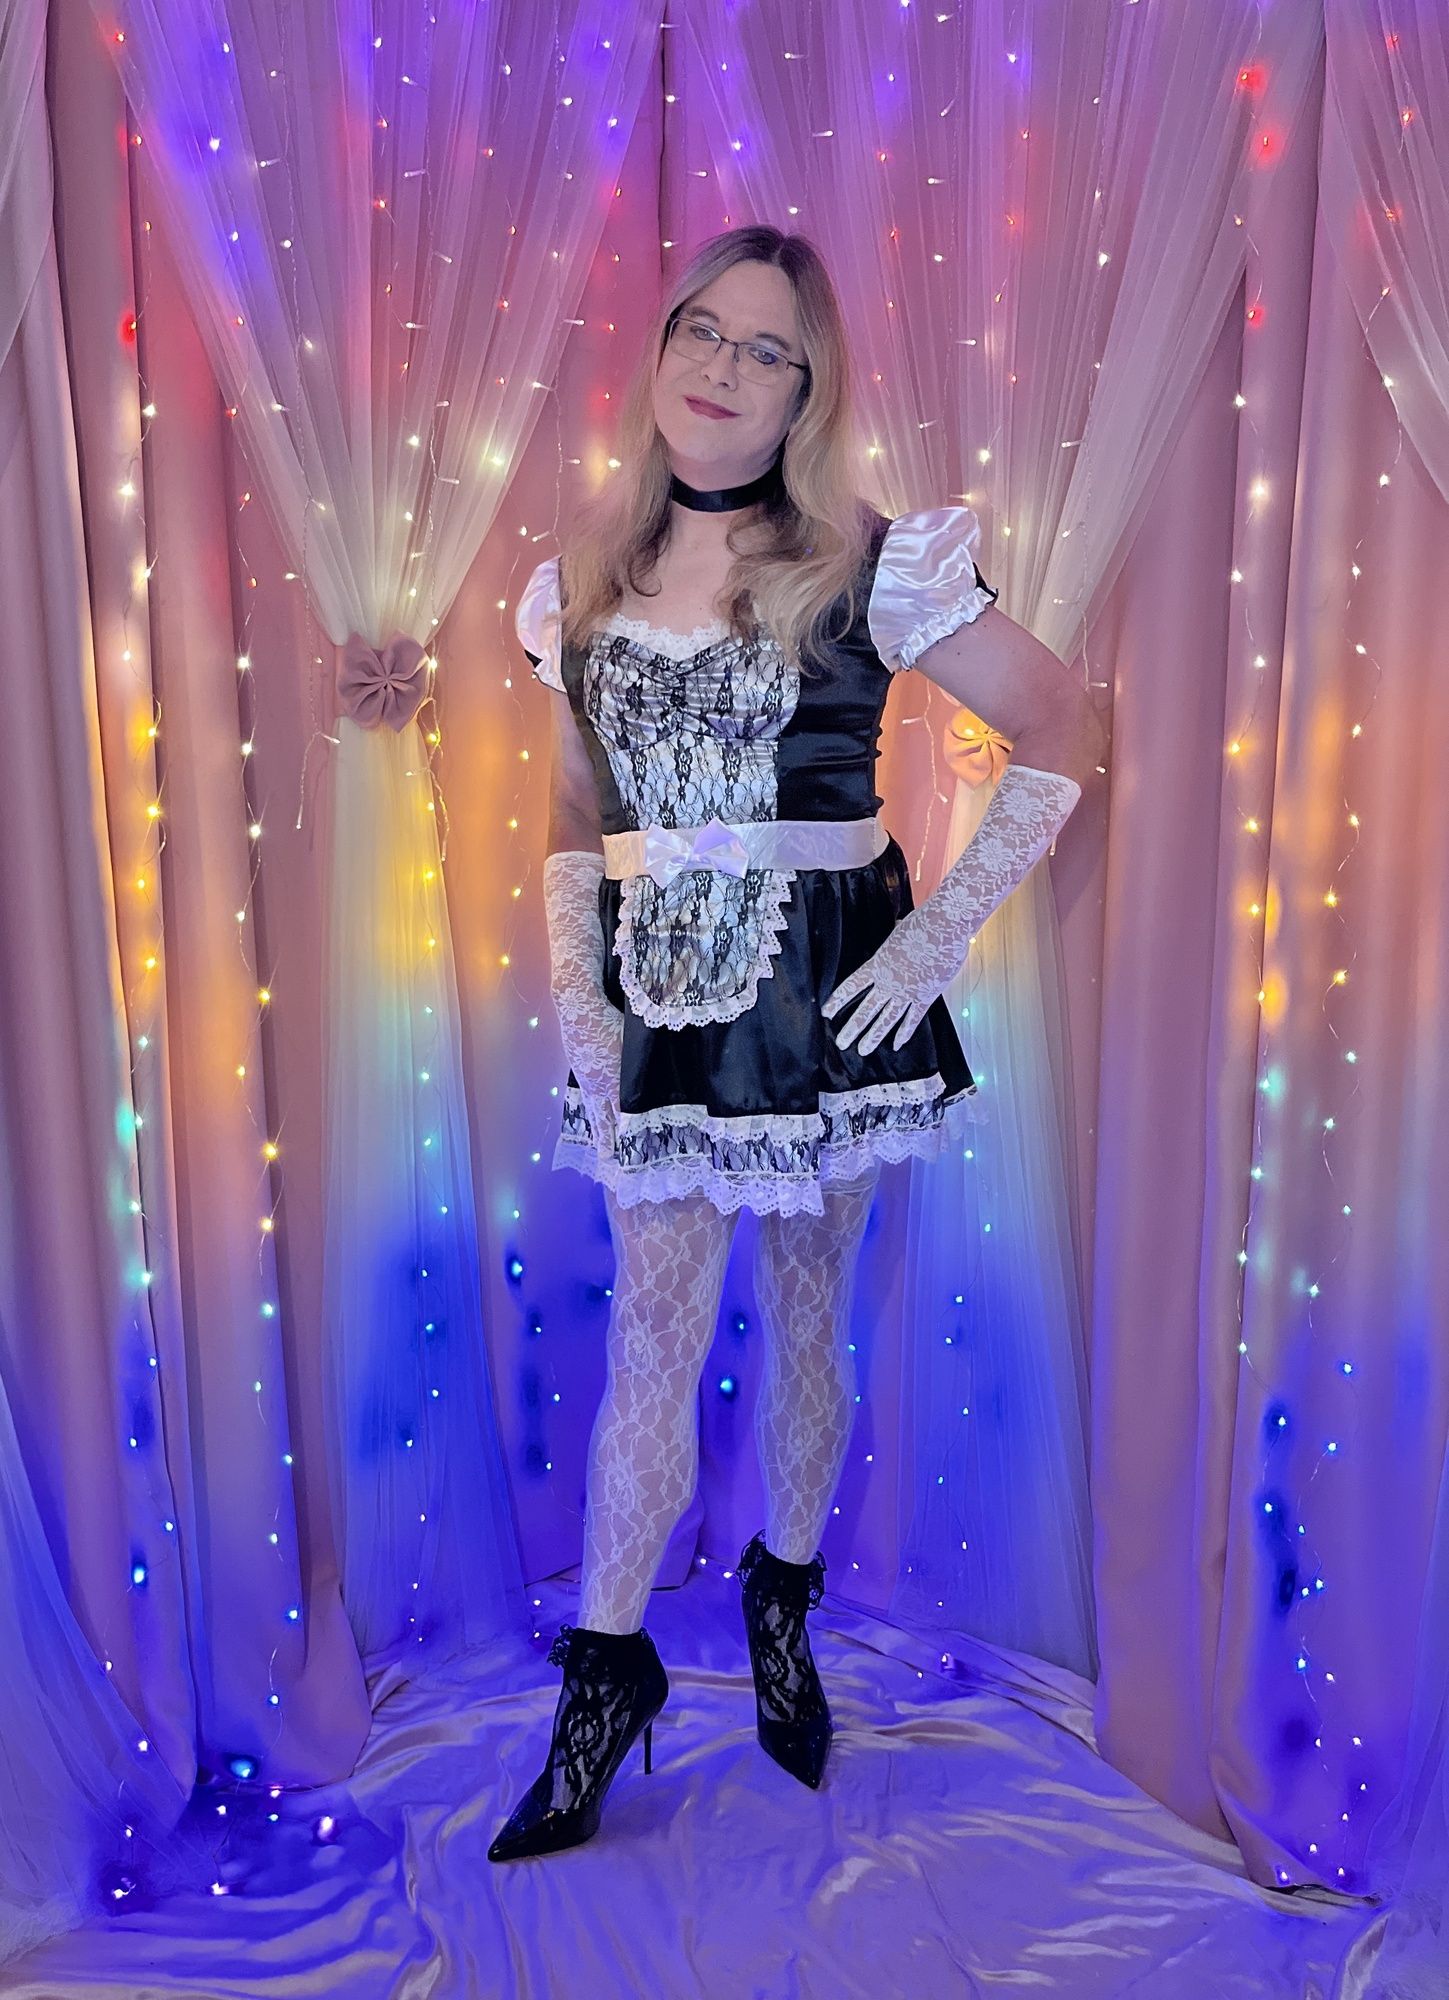 Joanie - Maid In Lace #13